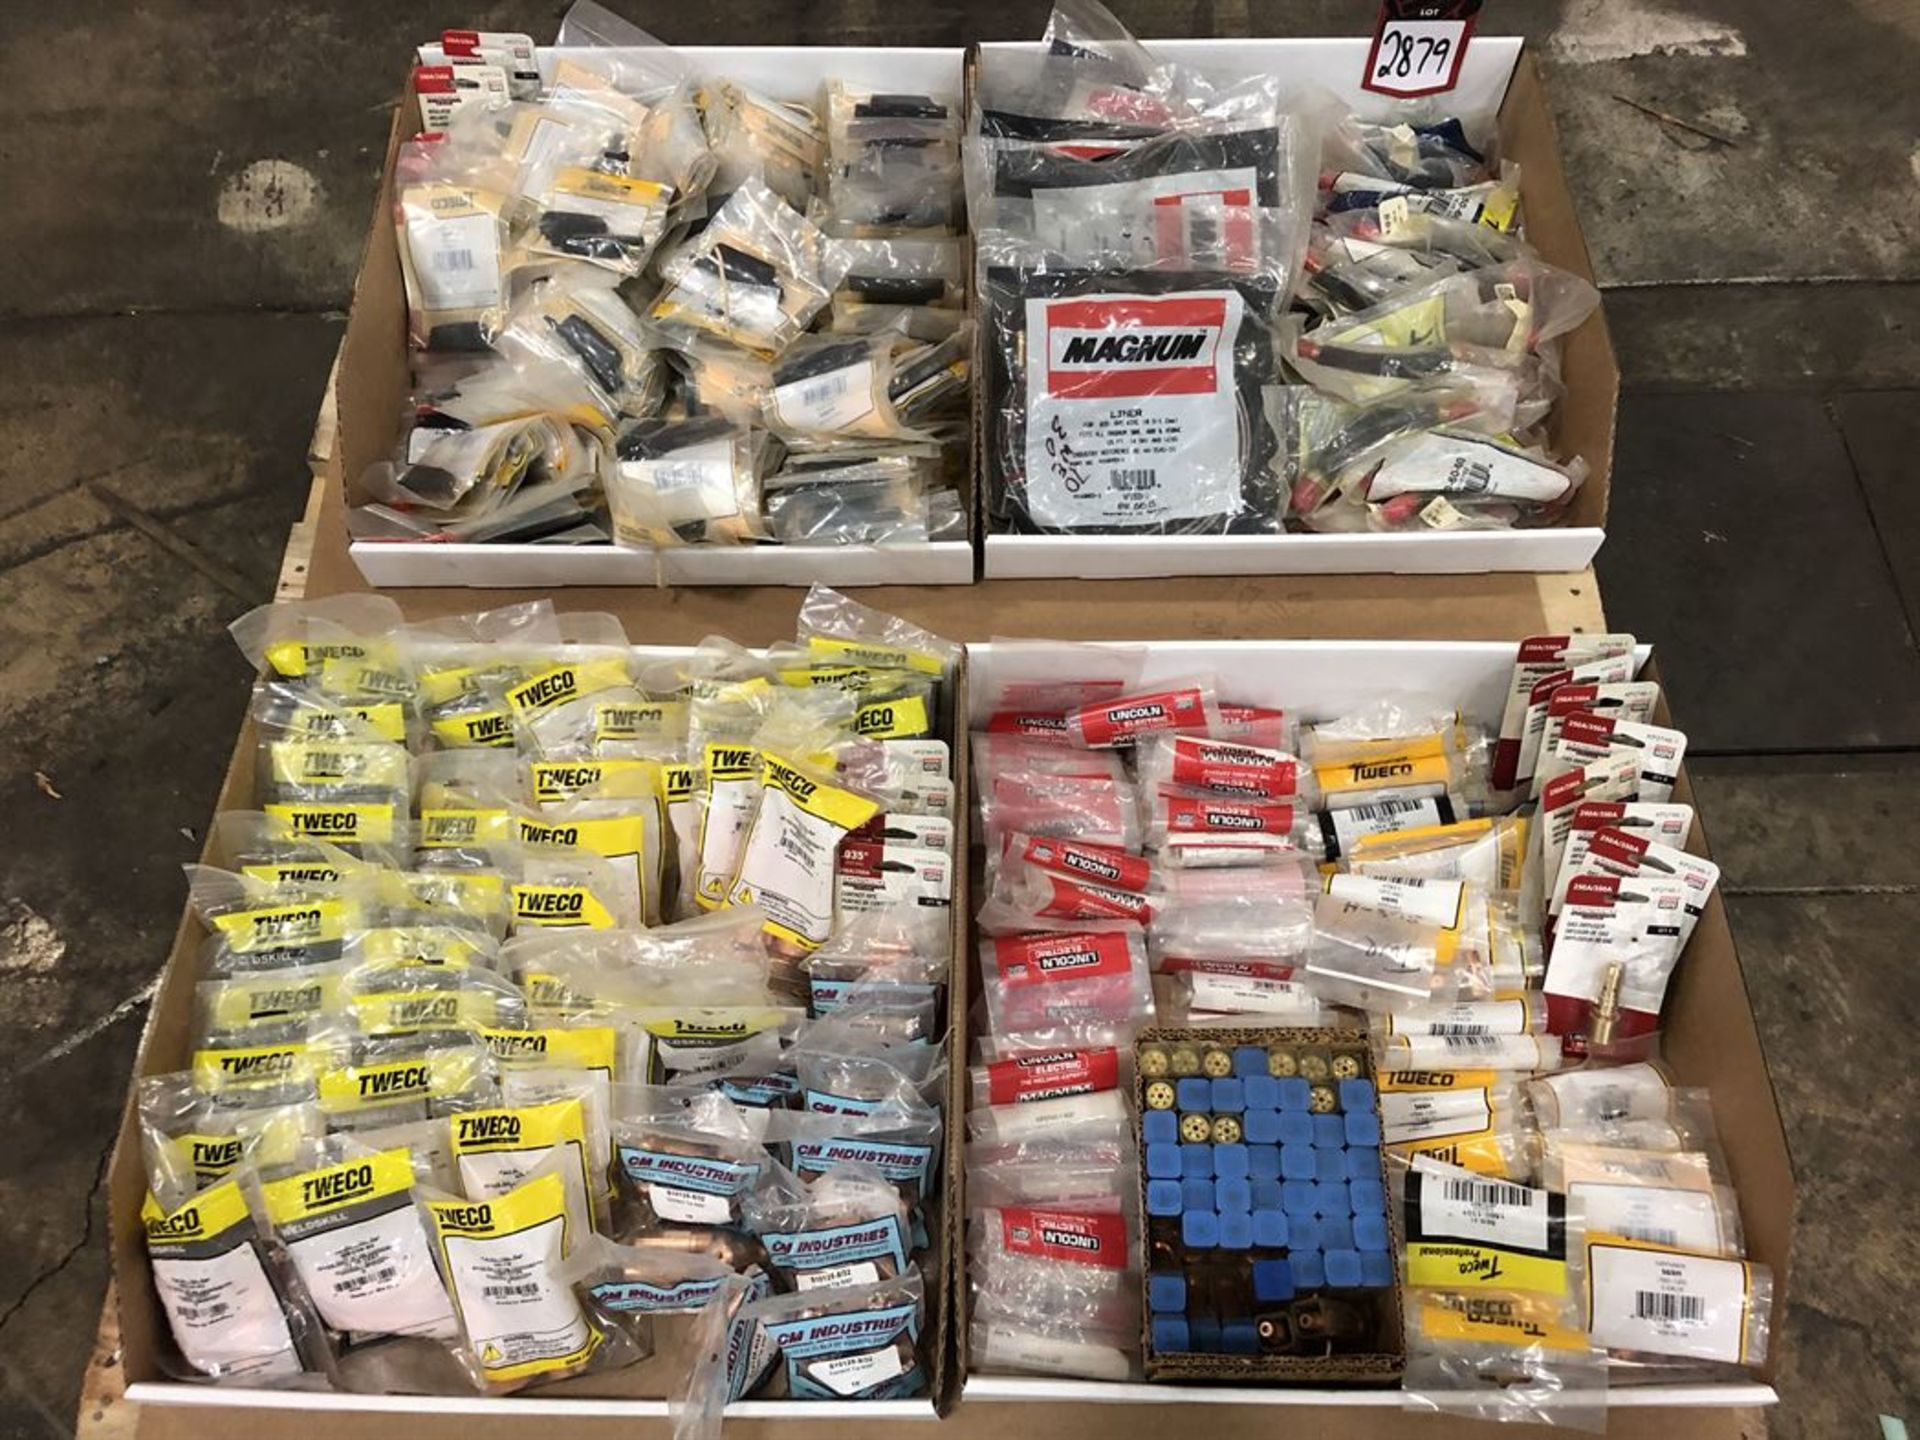 Lot Comprising Assorted Welding Torch Contact Tips, Wire Conduit, and Insulators, (23K)